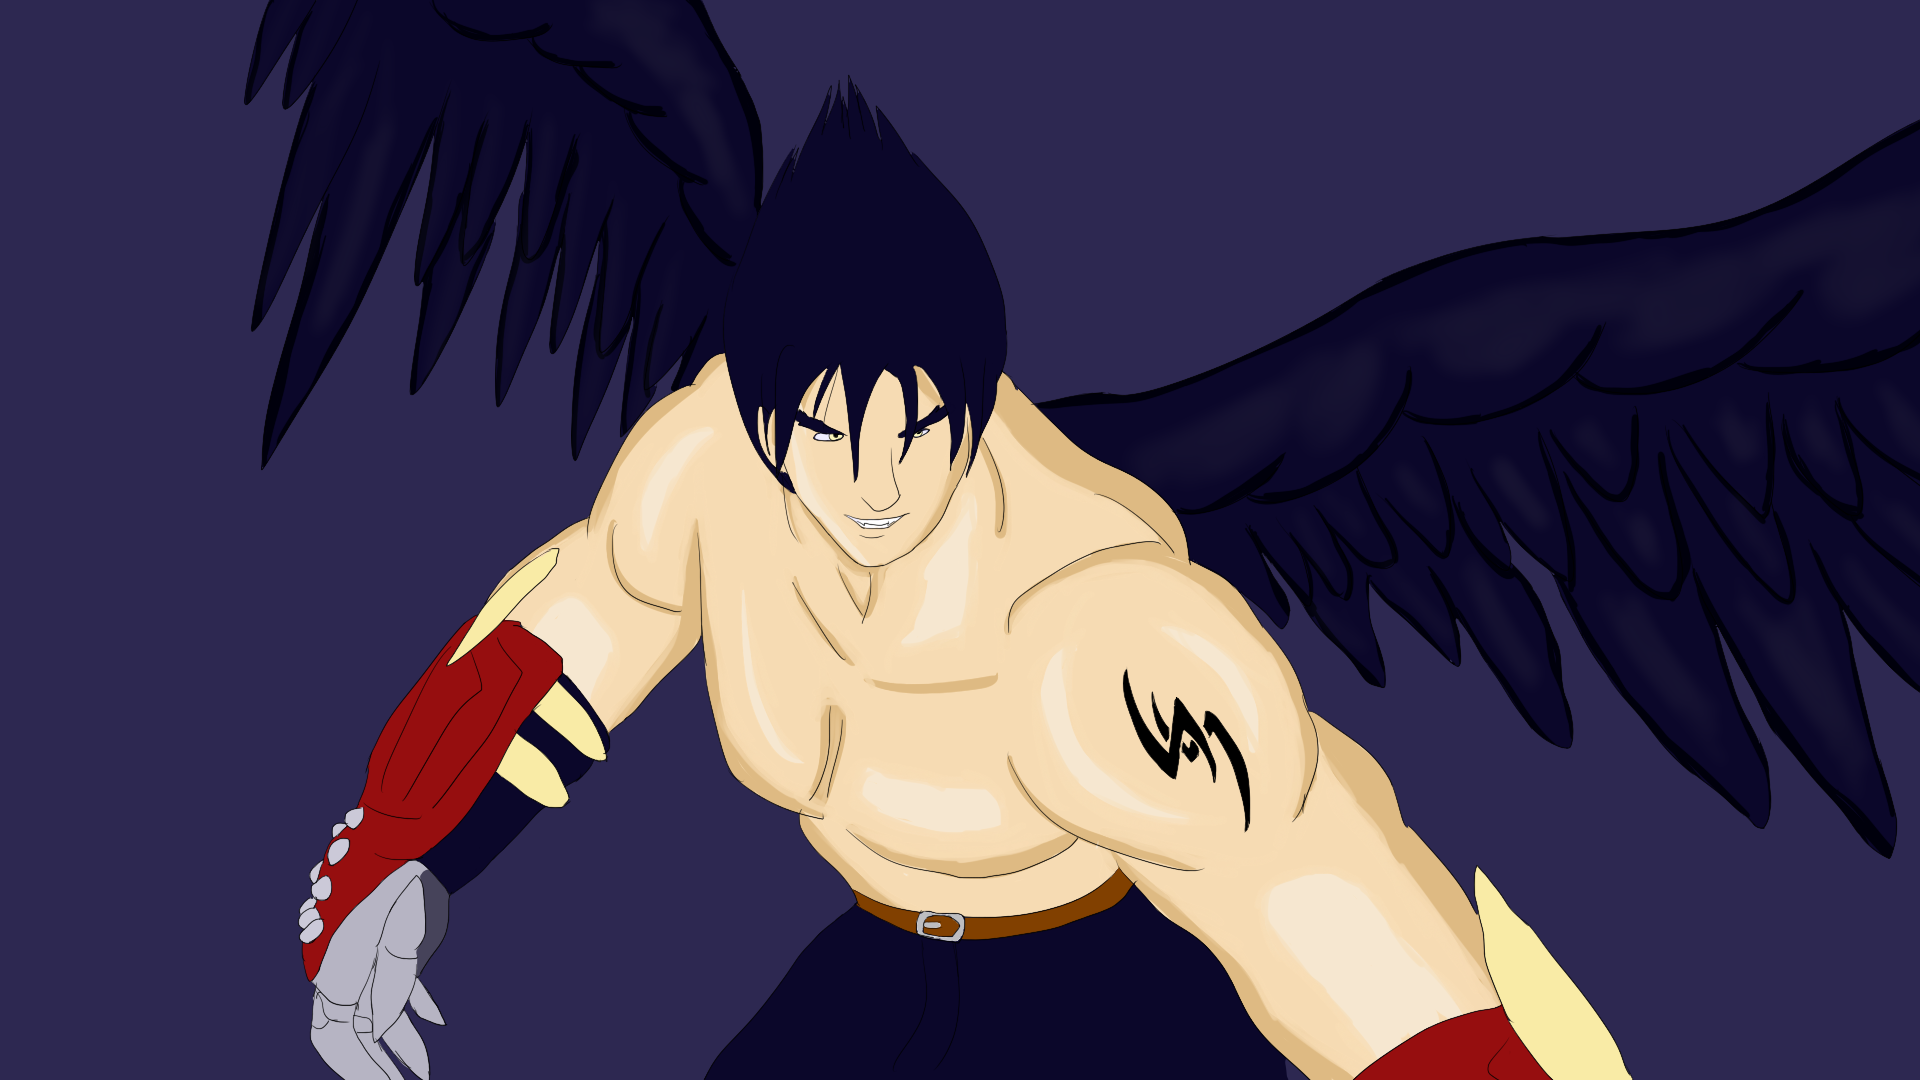 Pose is traced from a Tekken Blood Vengeance screenshot. Updates were made to make the character look more like his Tekken 5 version rather than the movie version. This draft is unfinished shading.
